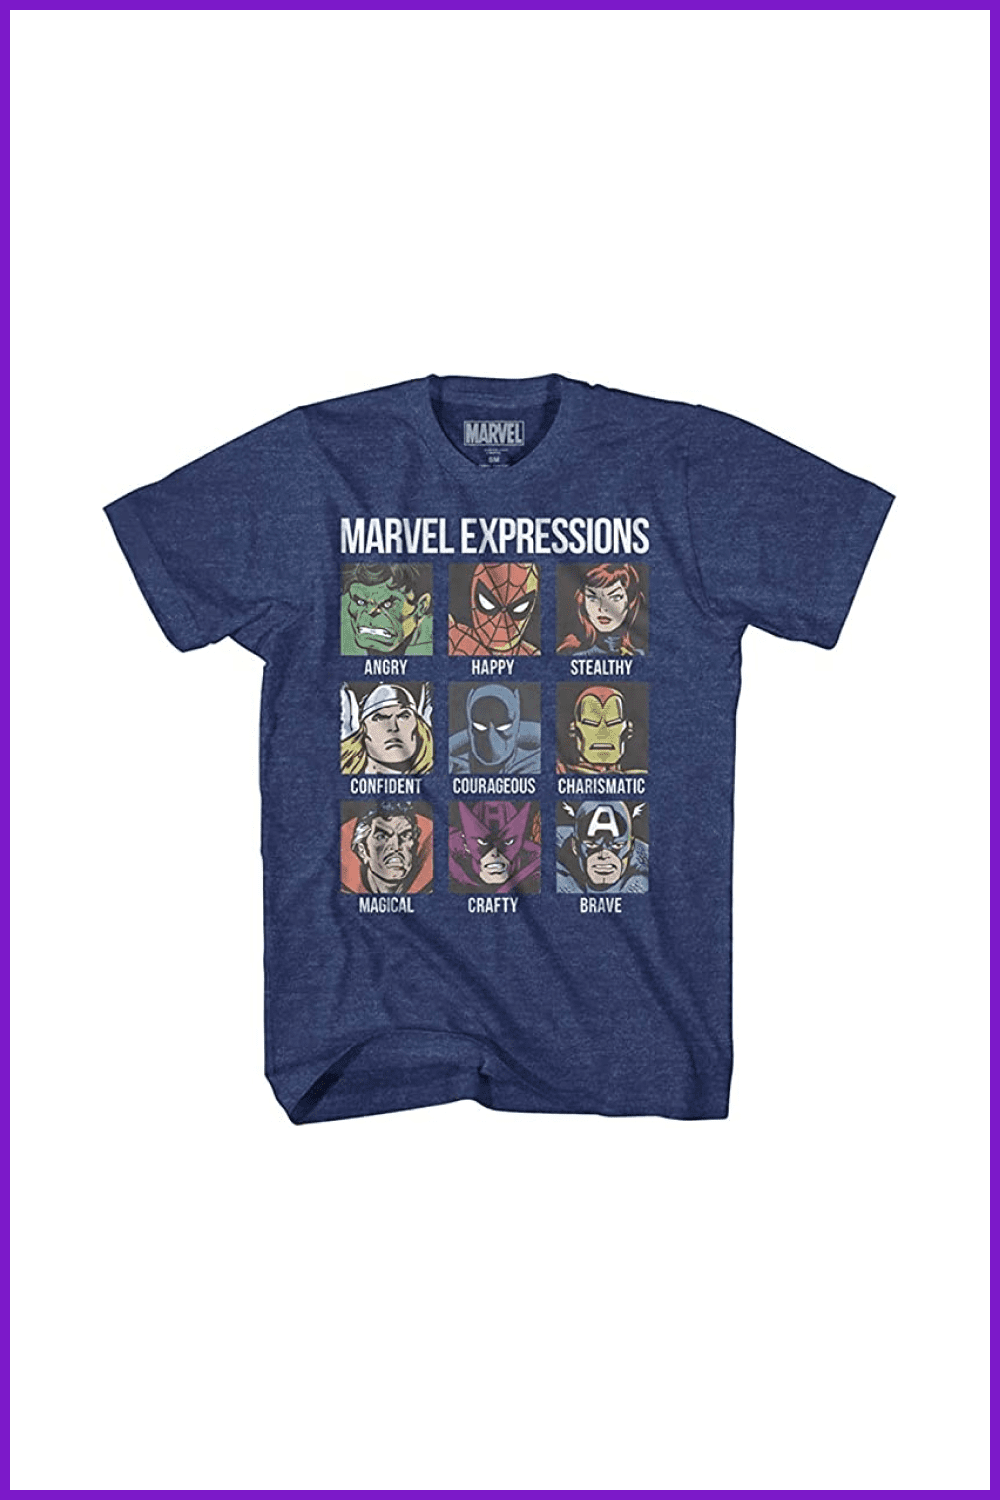 Blue T-shirt with painted Marvel super heroes.